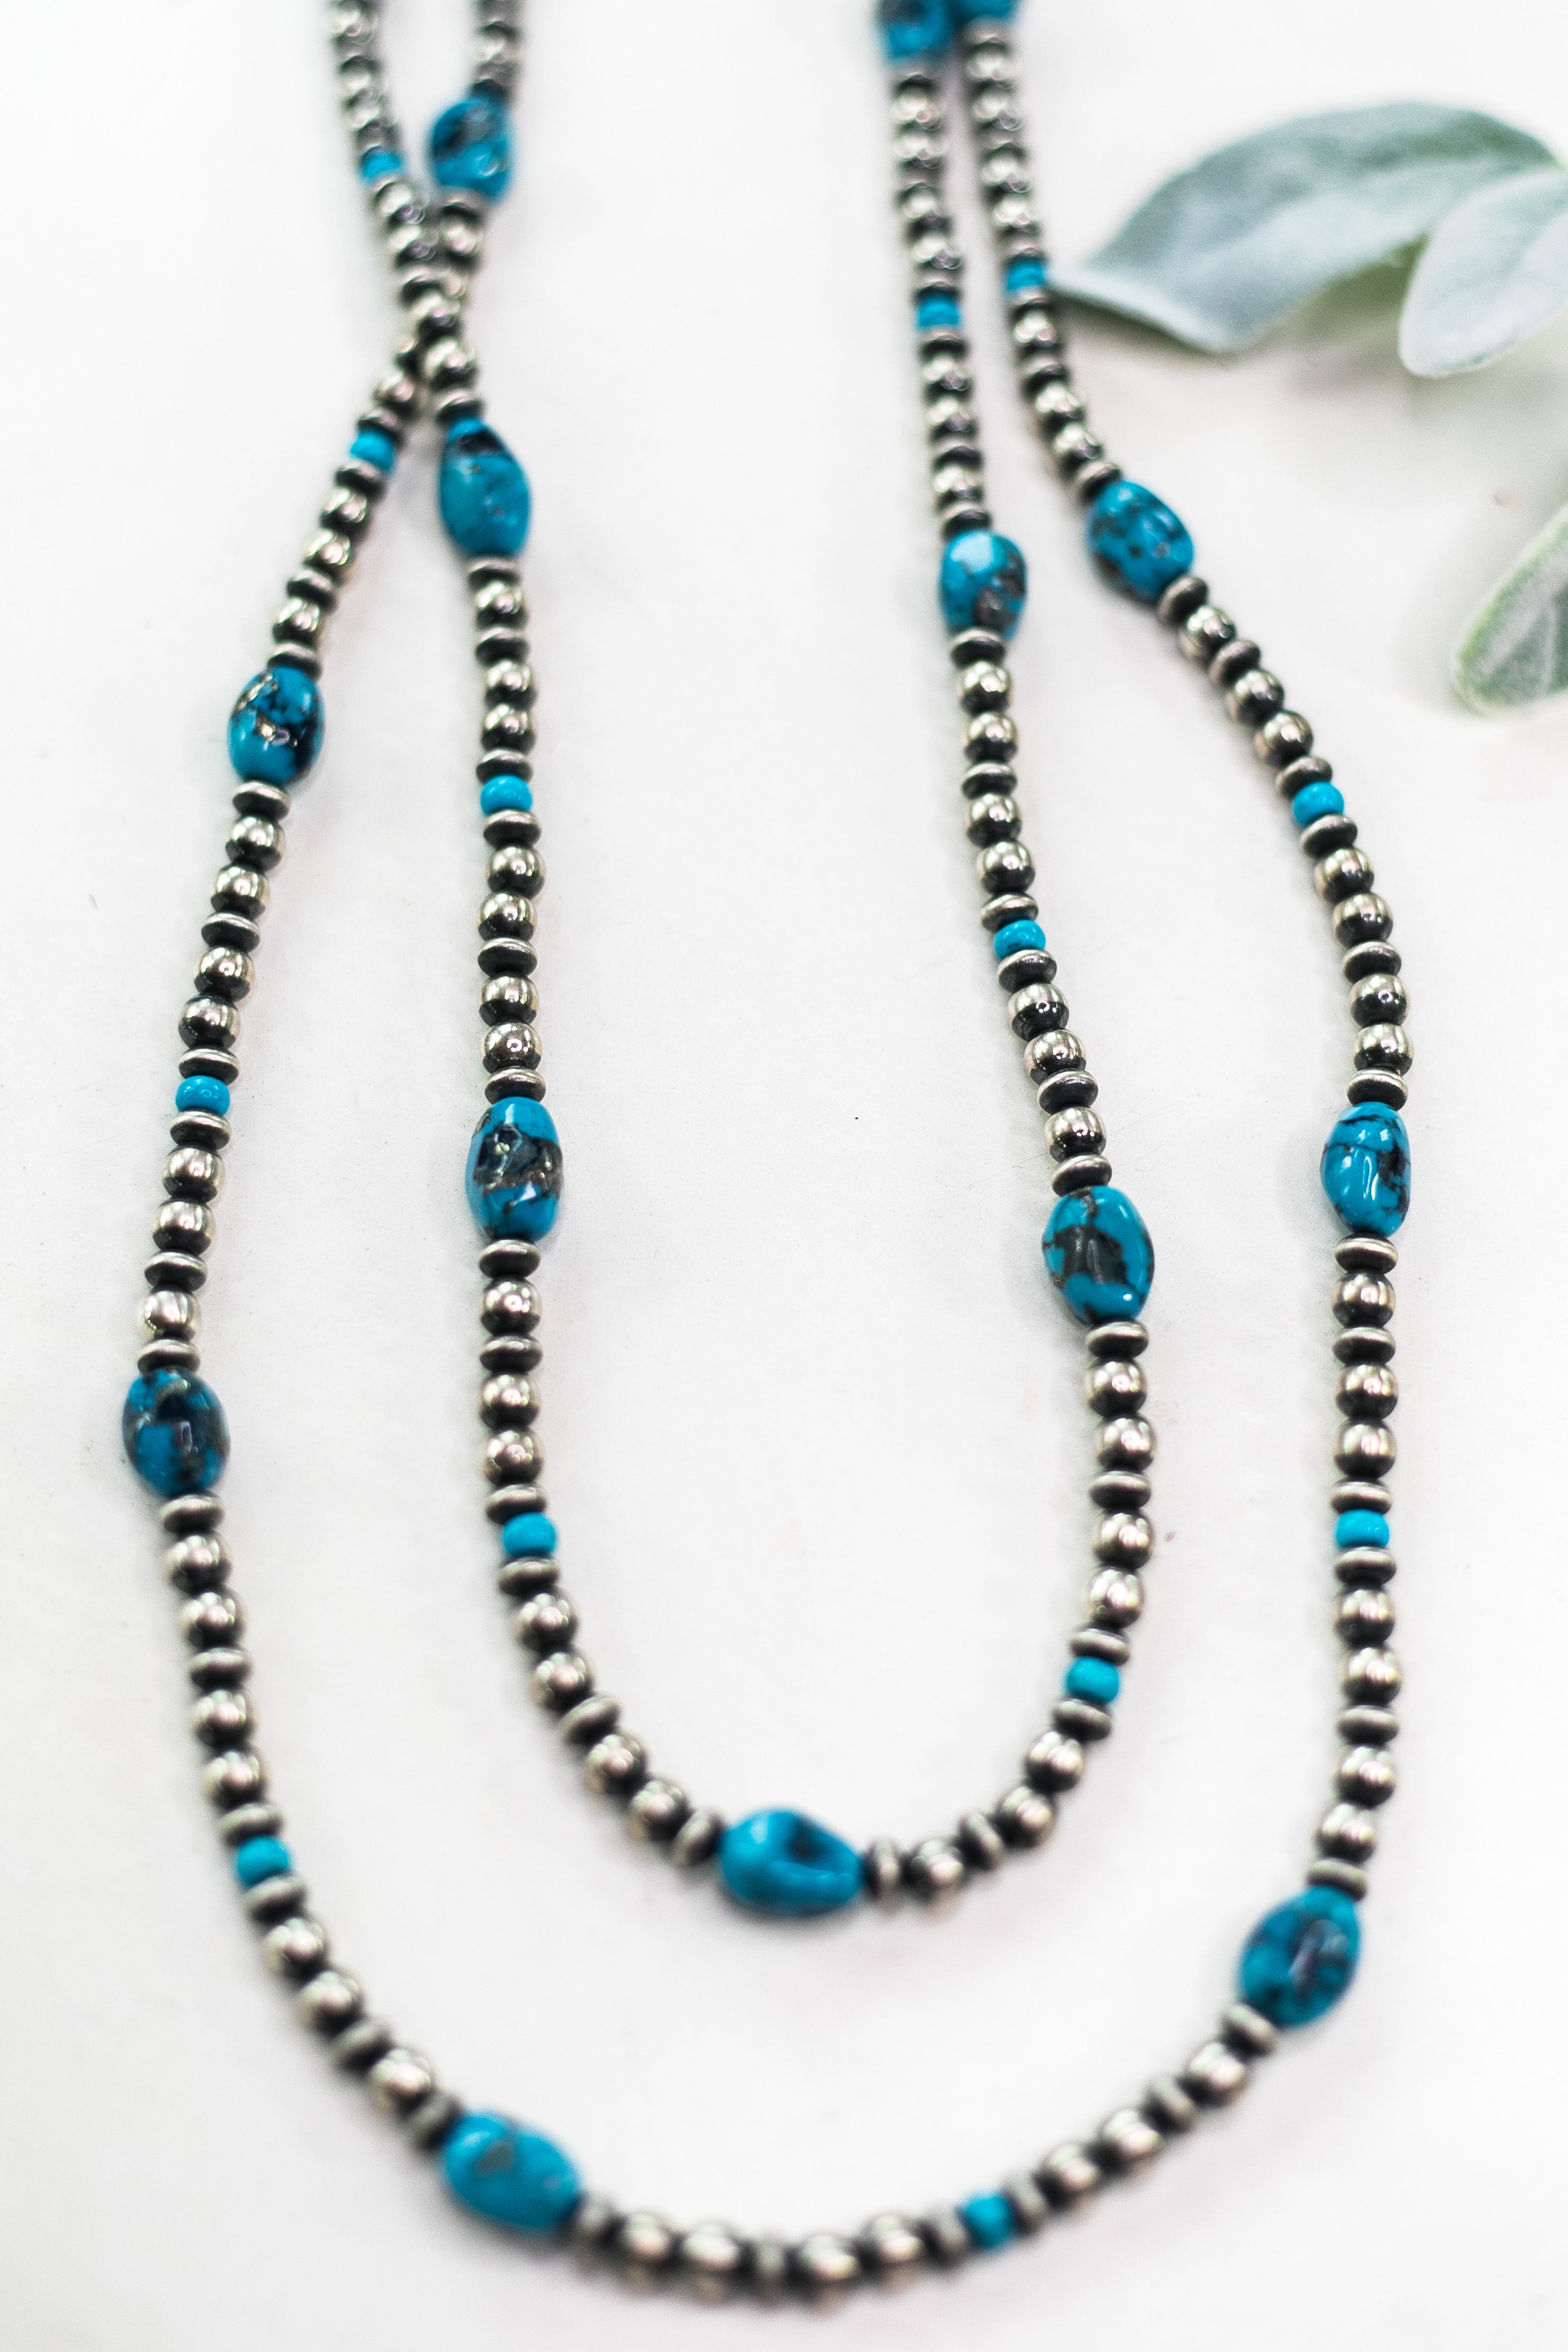 Navajo | Navajo Handmade Sterling Silver Navajo Pearl Necklace with Turquoise Stones | 60 inches - Giddy Up Glamour Boutique